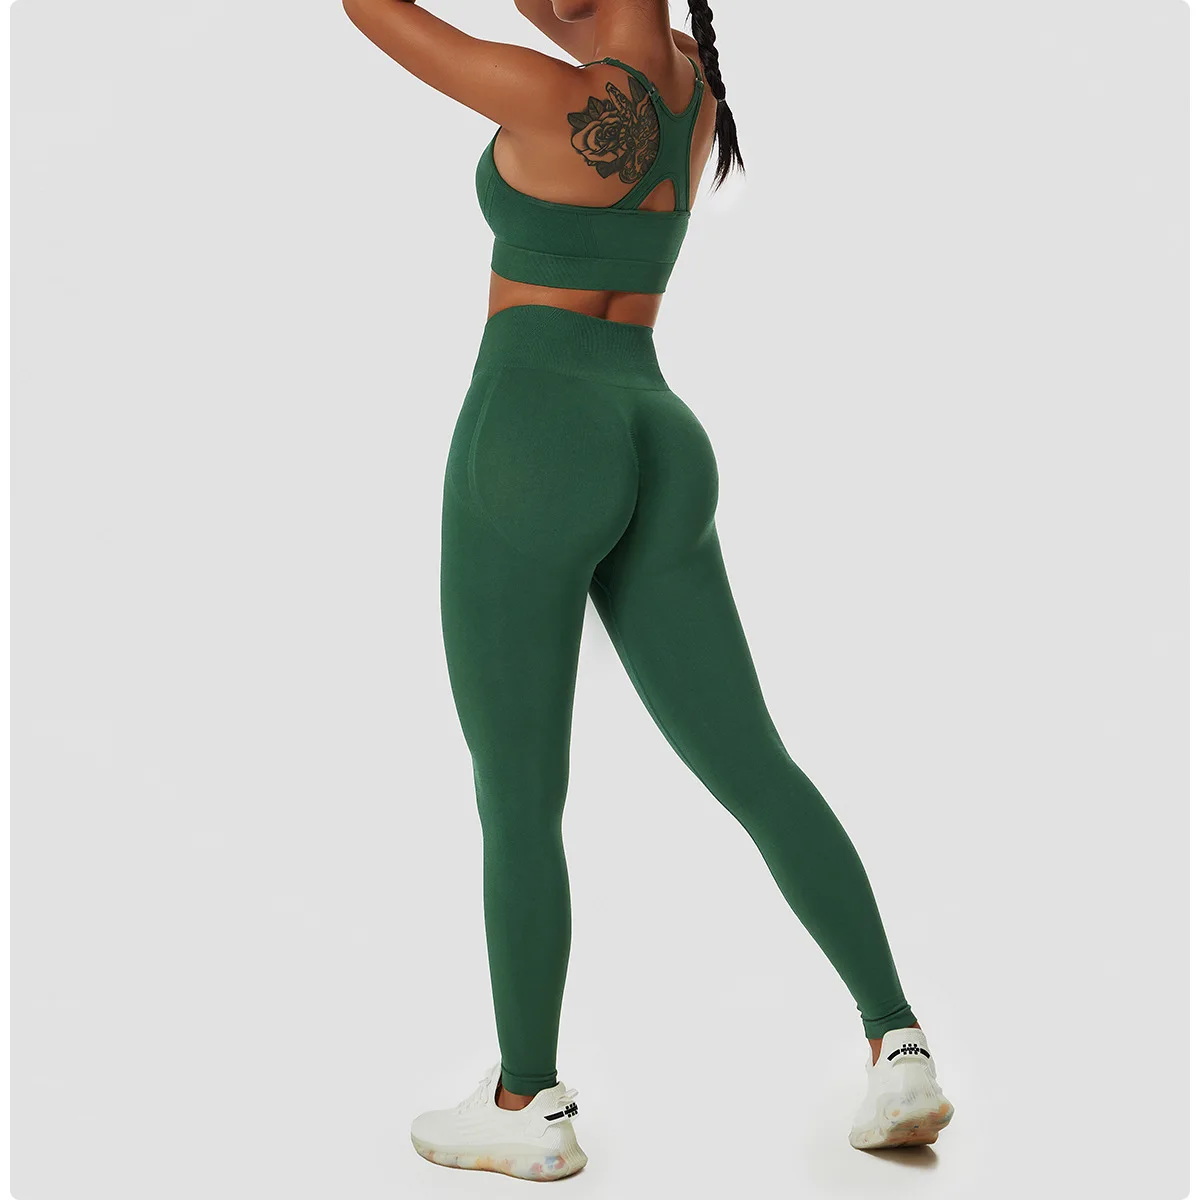 TRENIS Seamless Gym Leggings Women Yoga Pants Sexy High Waist Booty Lifting  Sports Clothing Fitness (Color : Army Green, Size : Small) at   Women's Clothing store